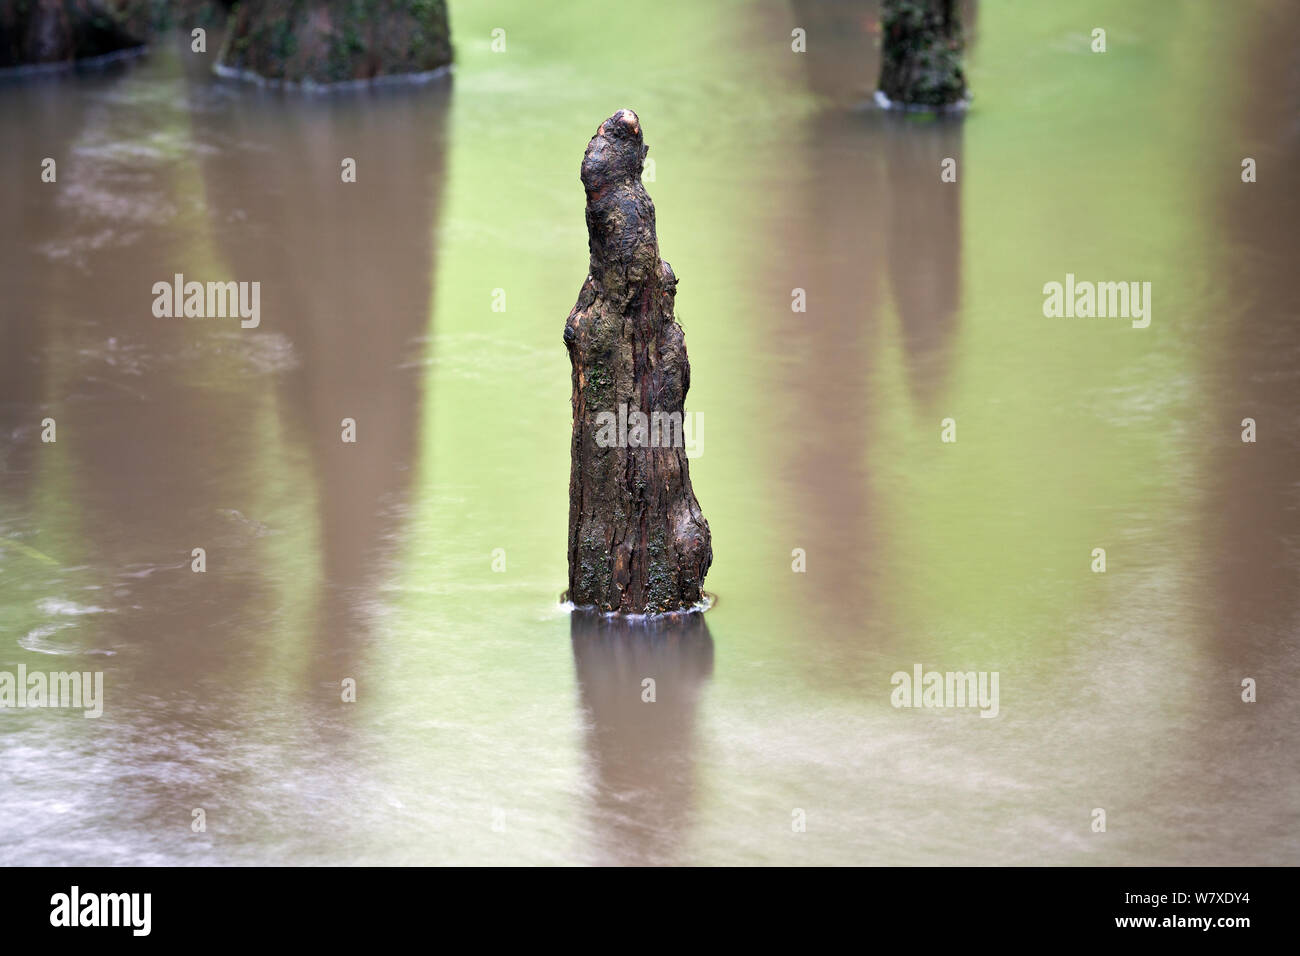 Bald cypress (Taxodium distichum) knee growing out of the water in a flooded area along the Boardwalk Trail in Congaree National Park, South Carolina, USA. Stock Photo